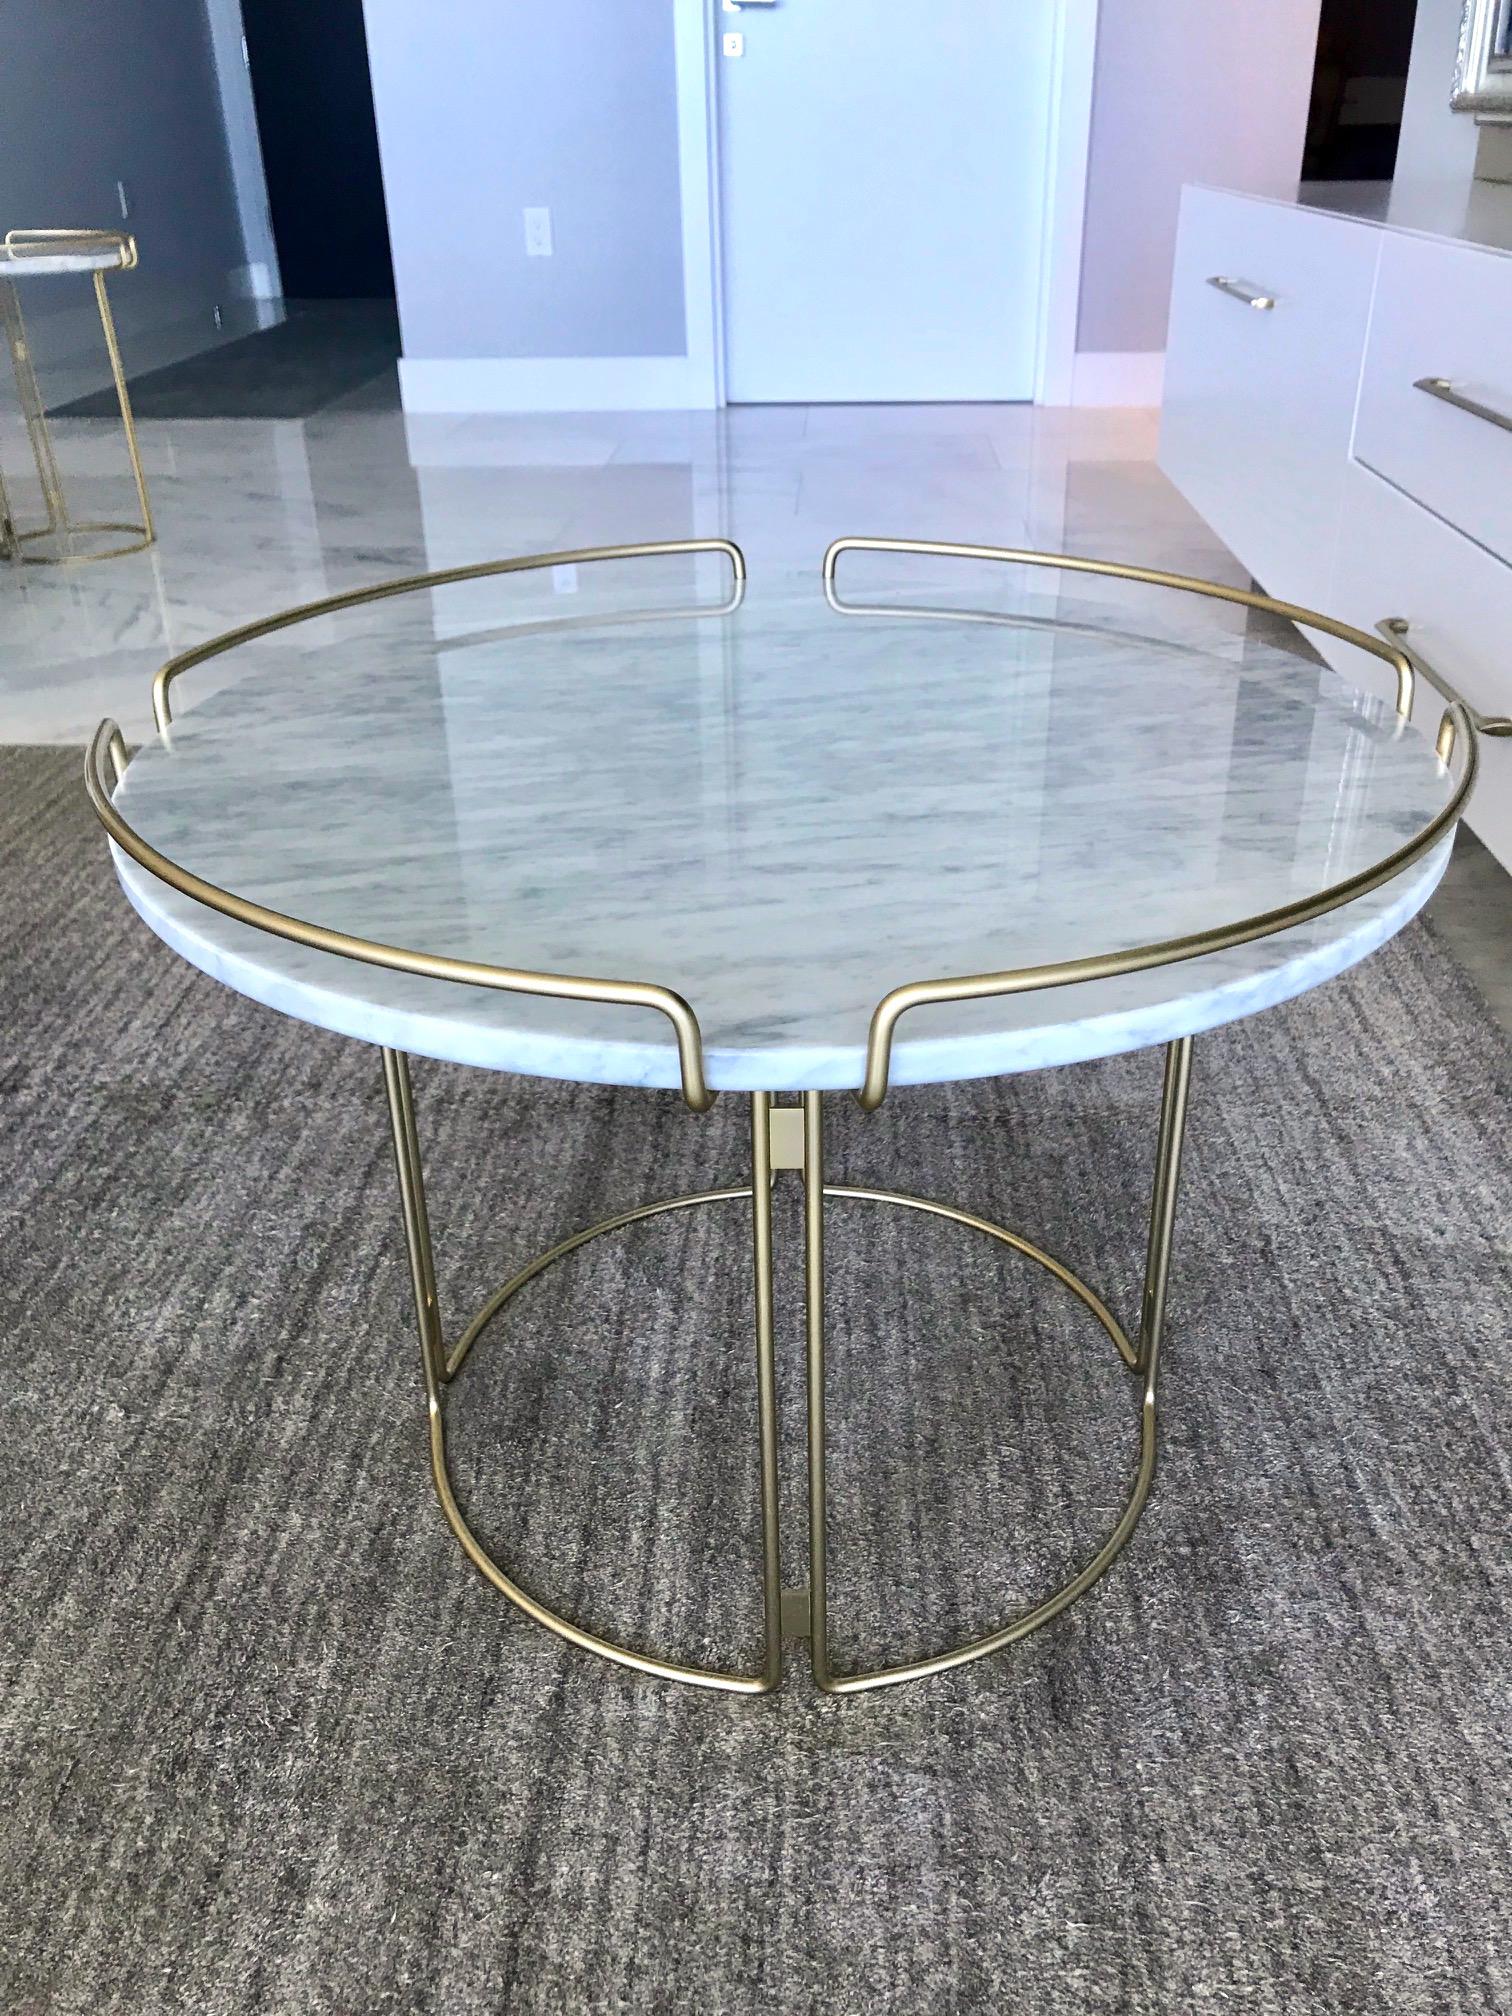 Lacquered Bijou End Table in Marble and Matte Gold by Roche Bobois, 2018